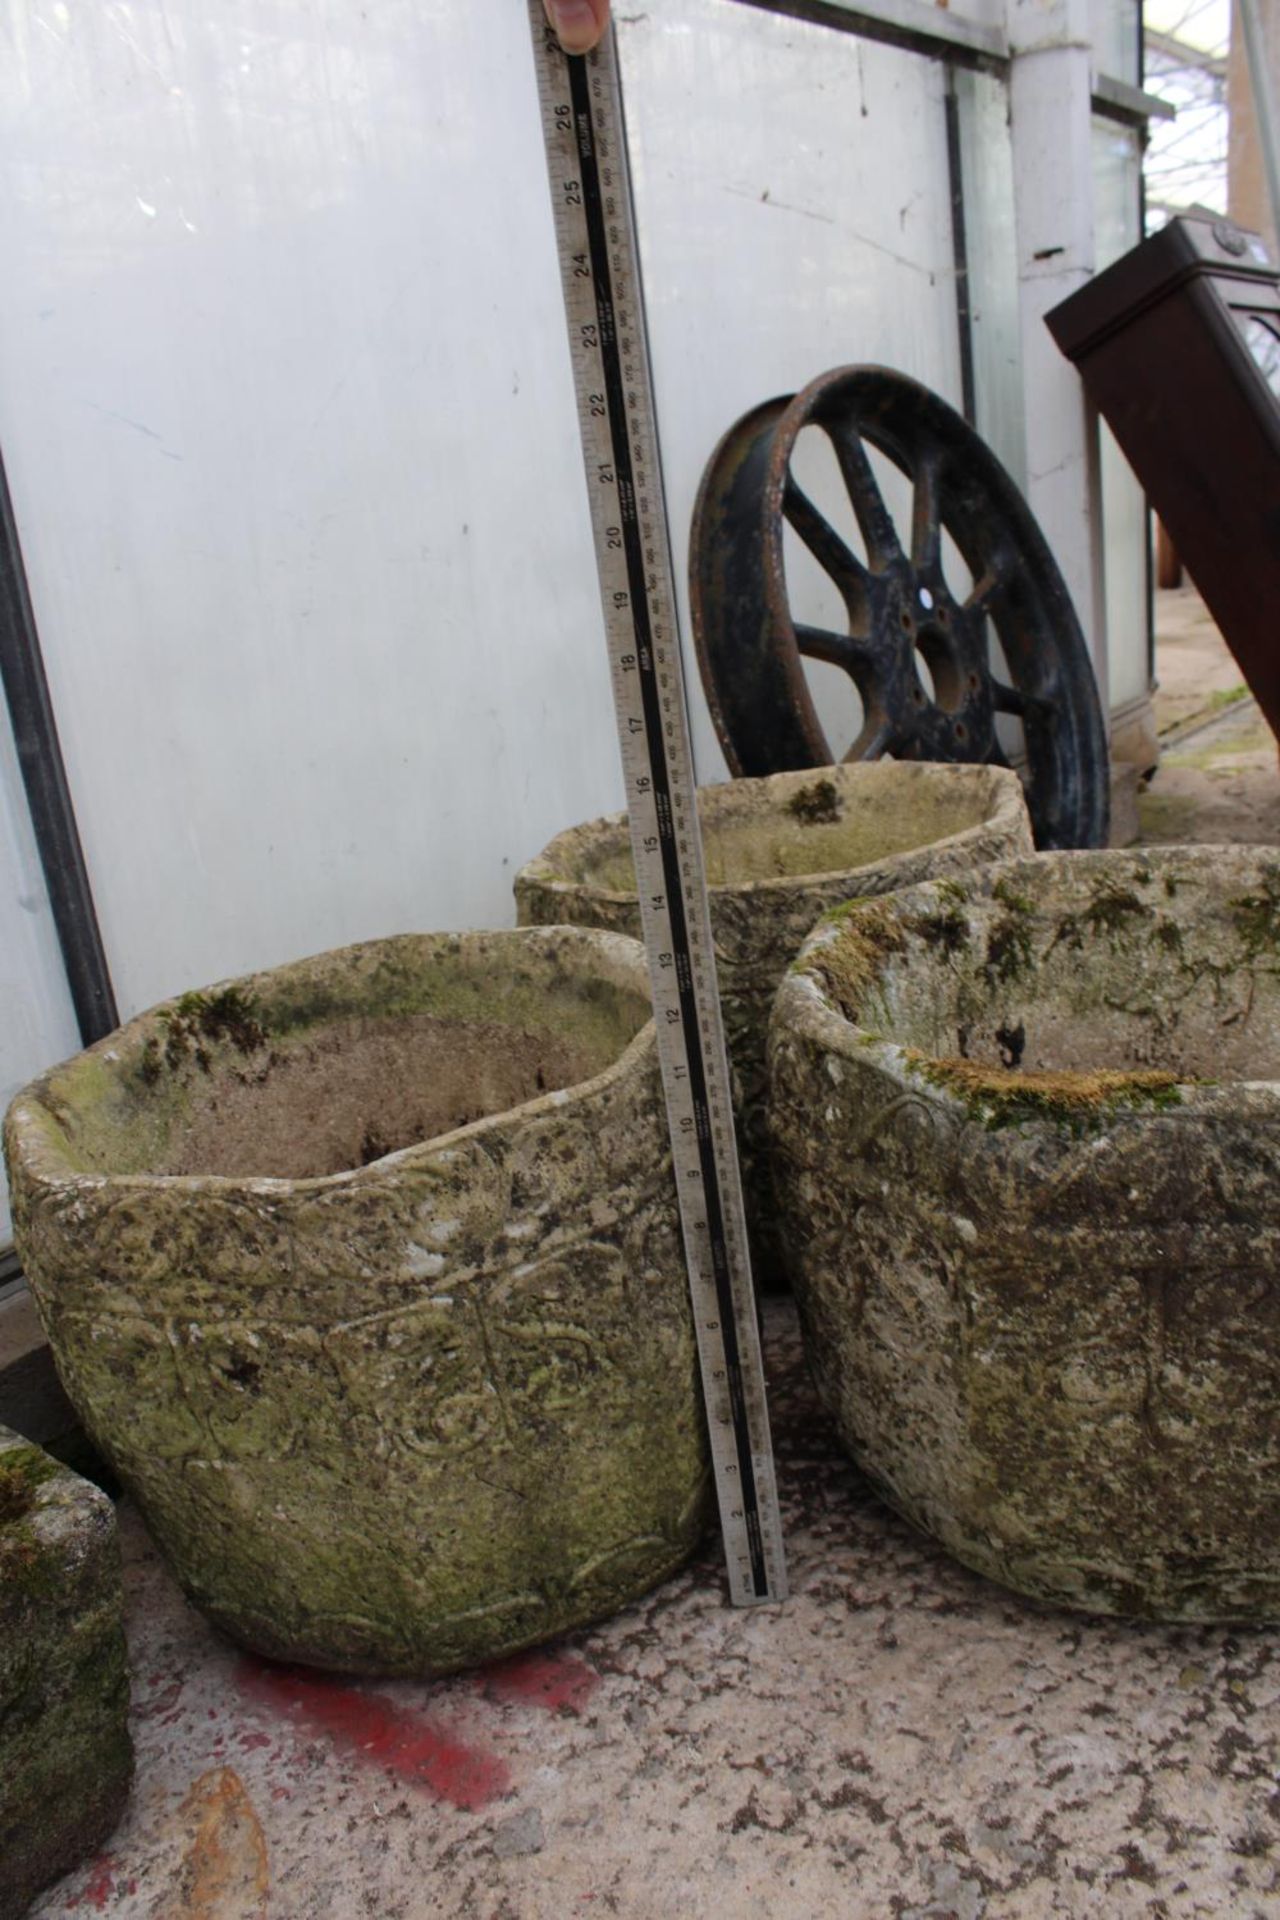 A SET OF THREE MATCHING RECONSTITUTED STONE GARDEN POTS - Image 3 of 3